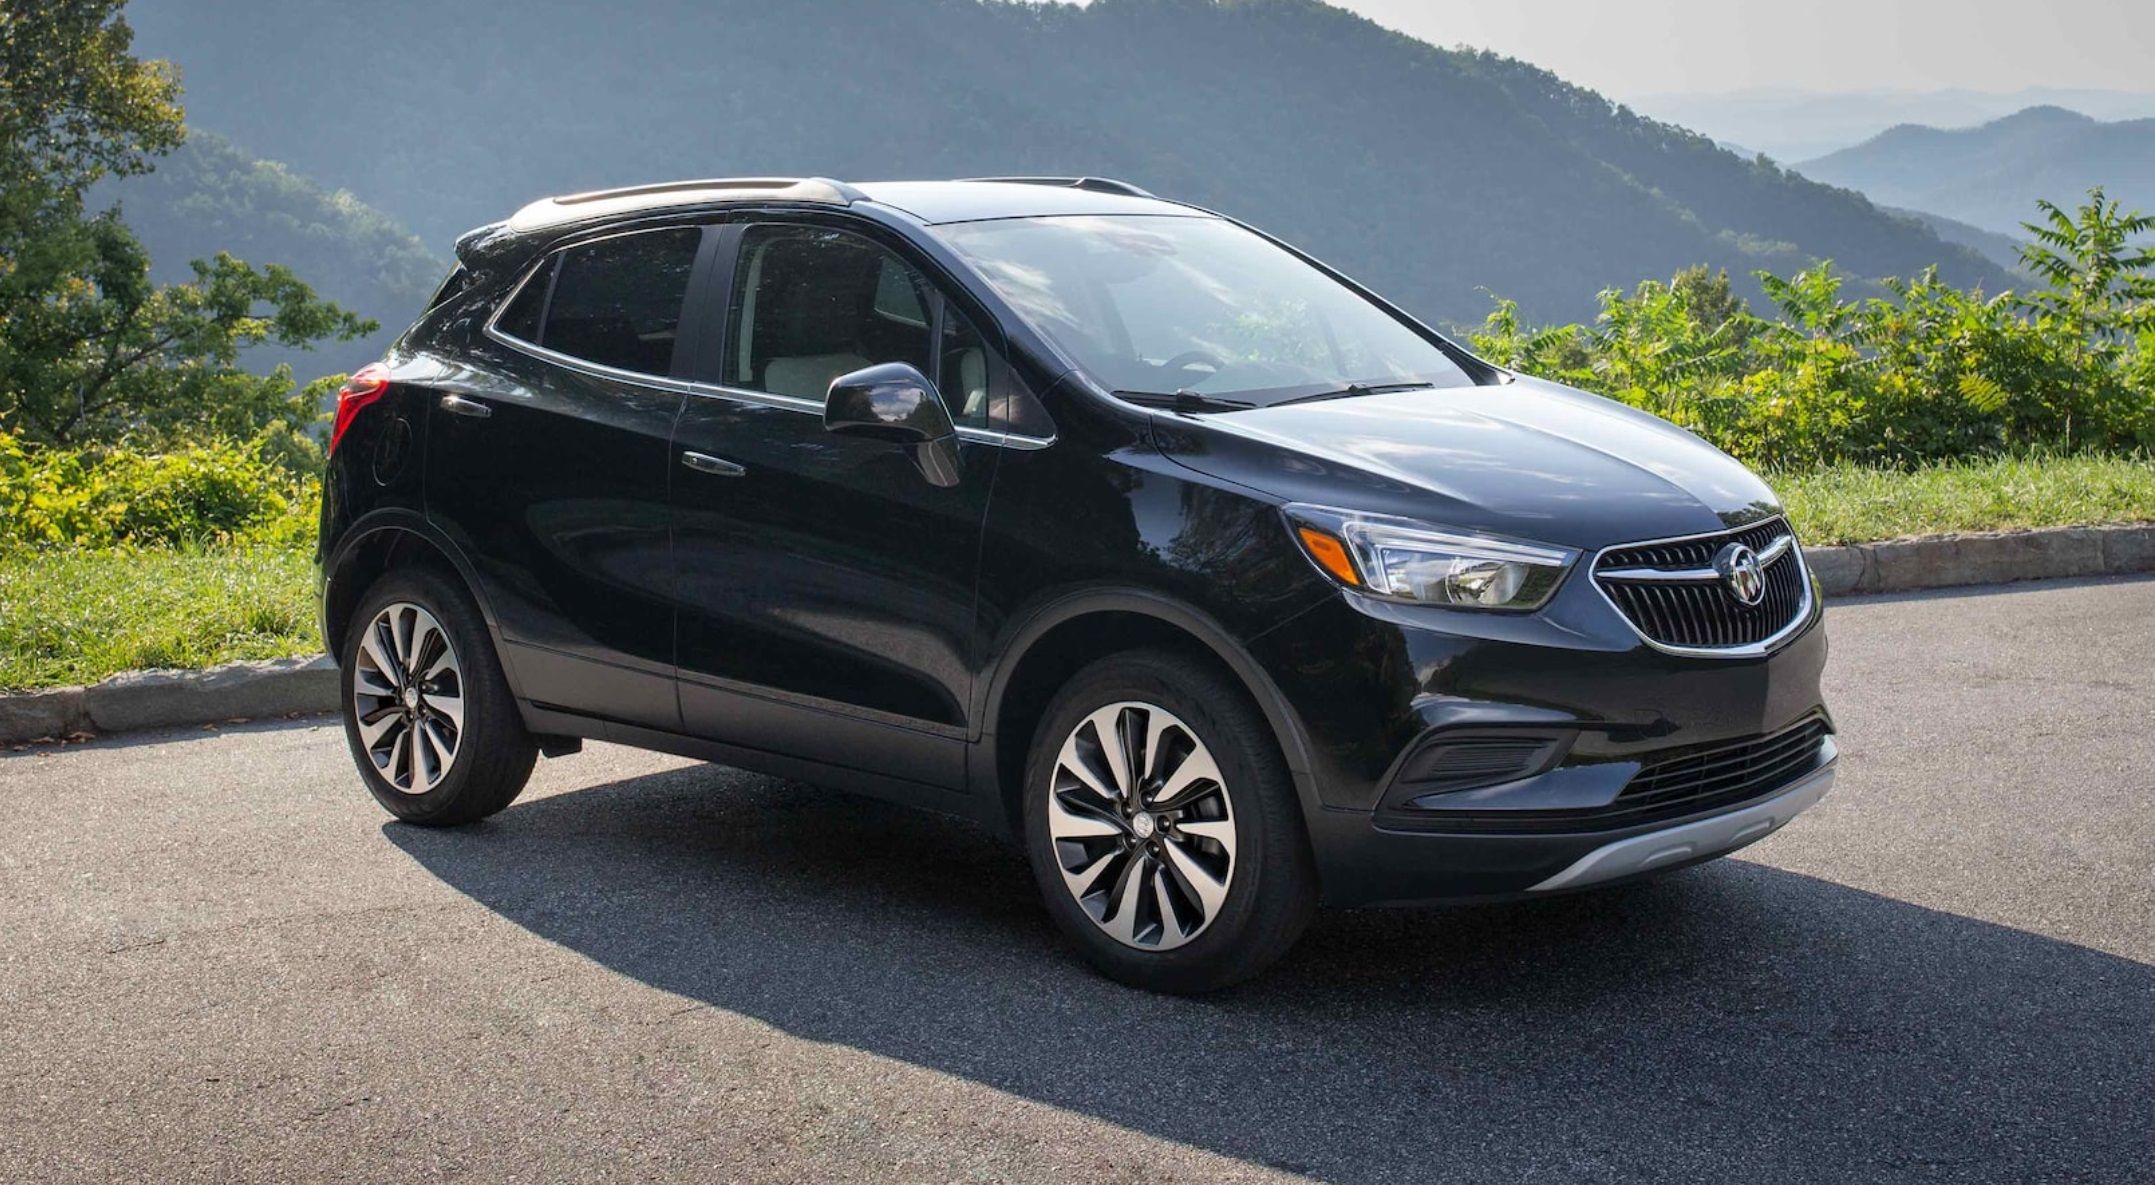 The 2021 Buick Encore under the sunlight.